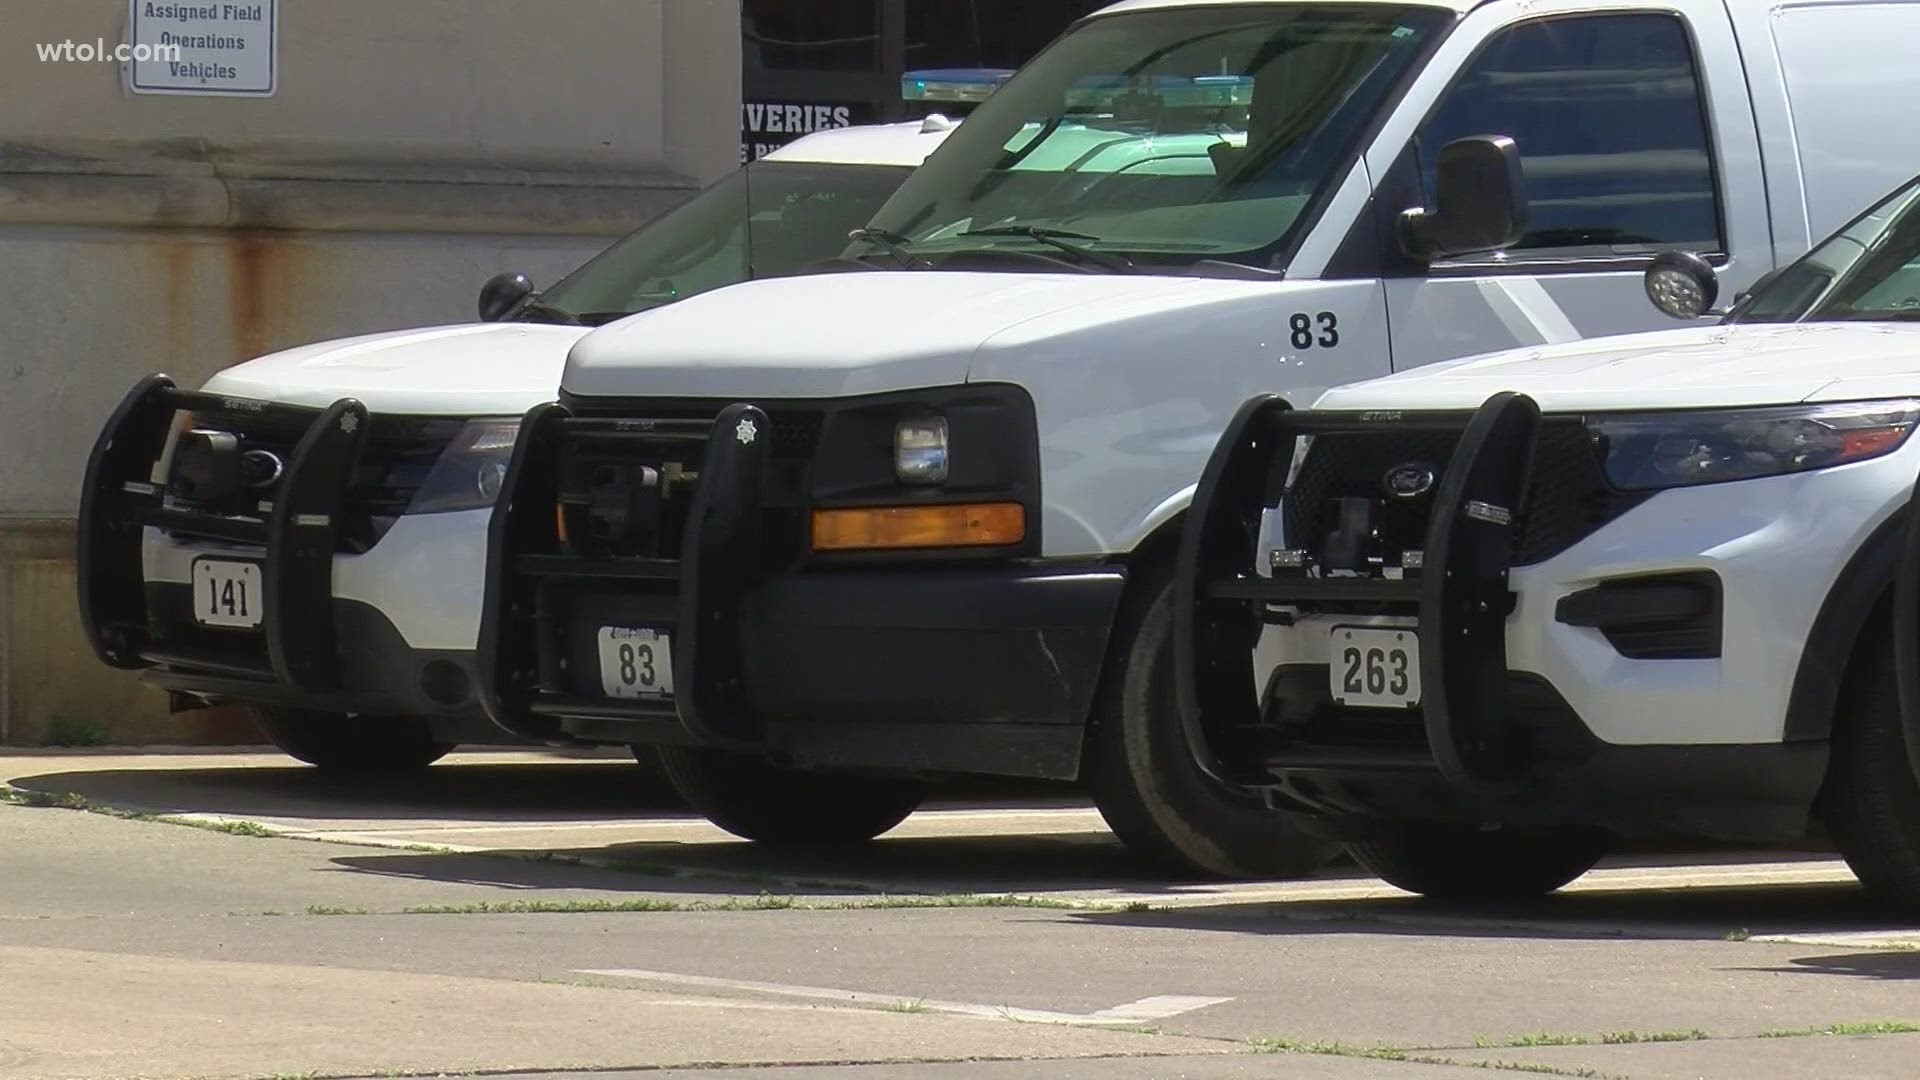 $4 million is allocated for the purchase of 60 pursuit-rated police vehicles, which will replace the old ones.